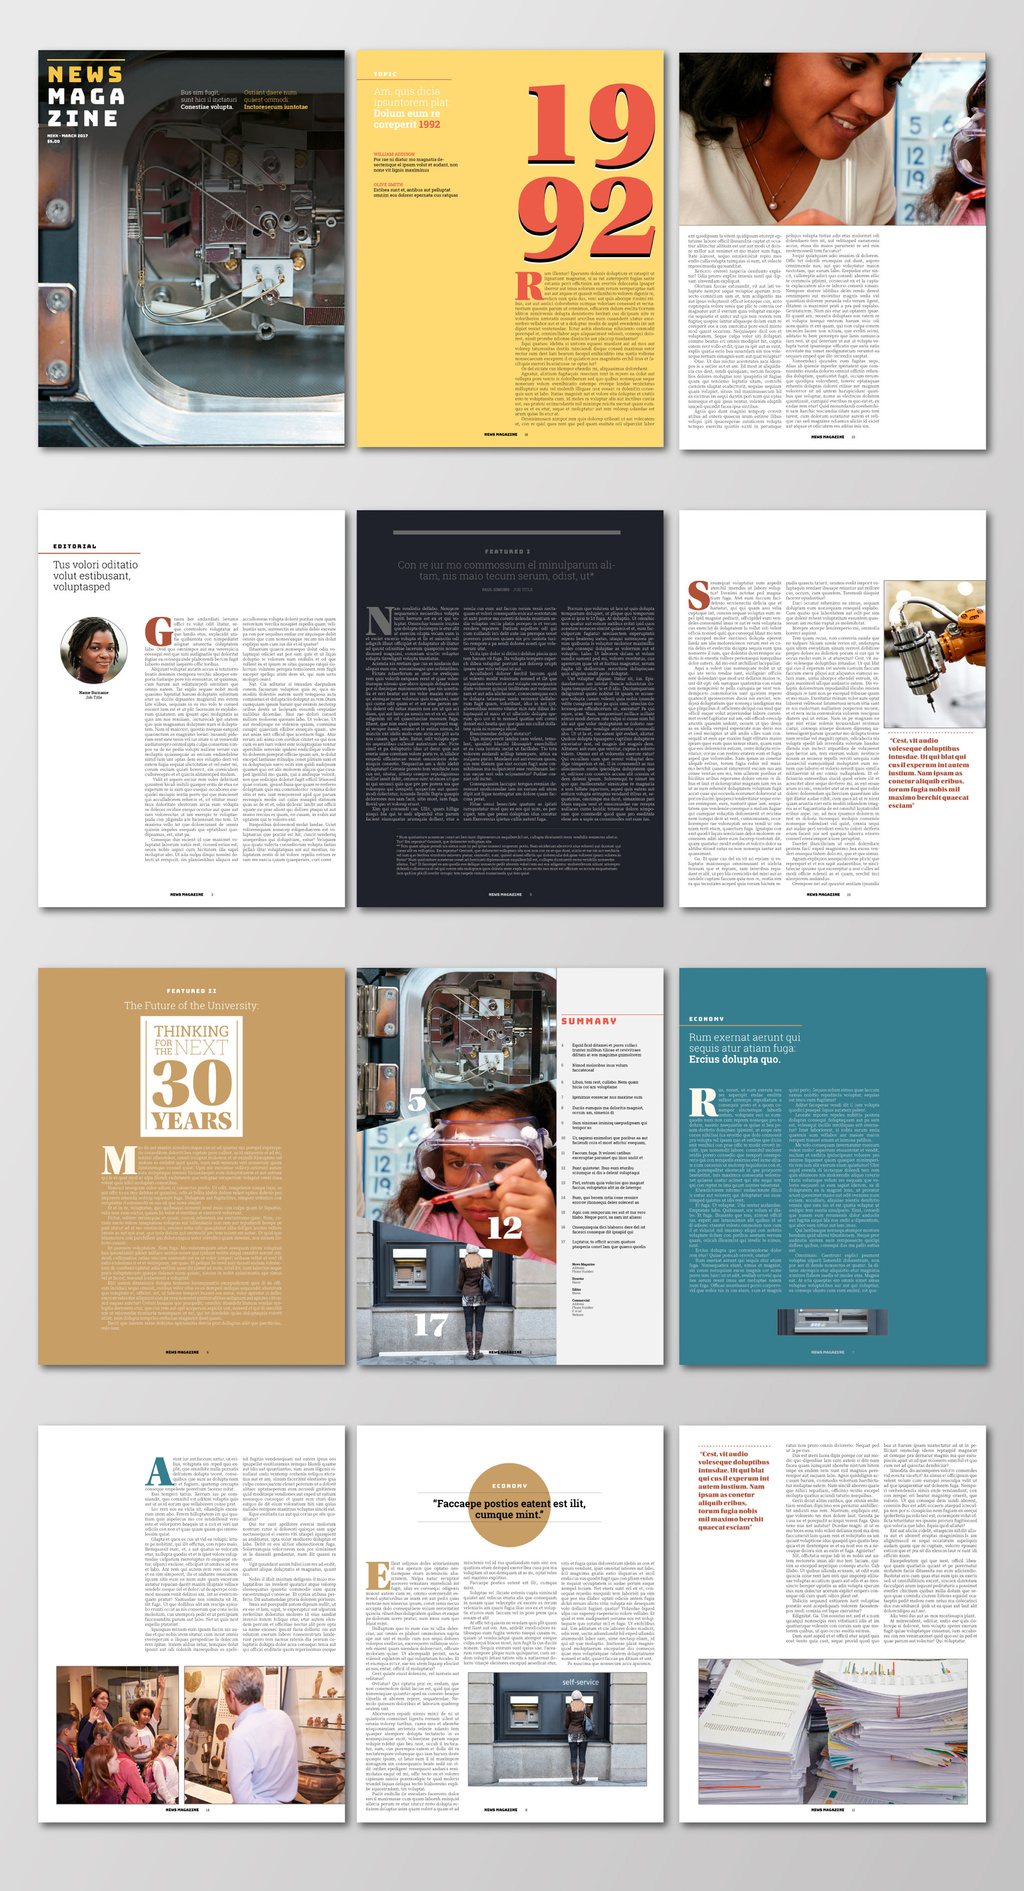 Free News Magazine Layout Template for Adobe InDesign (INDD Format)